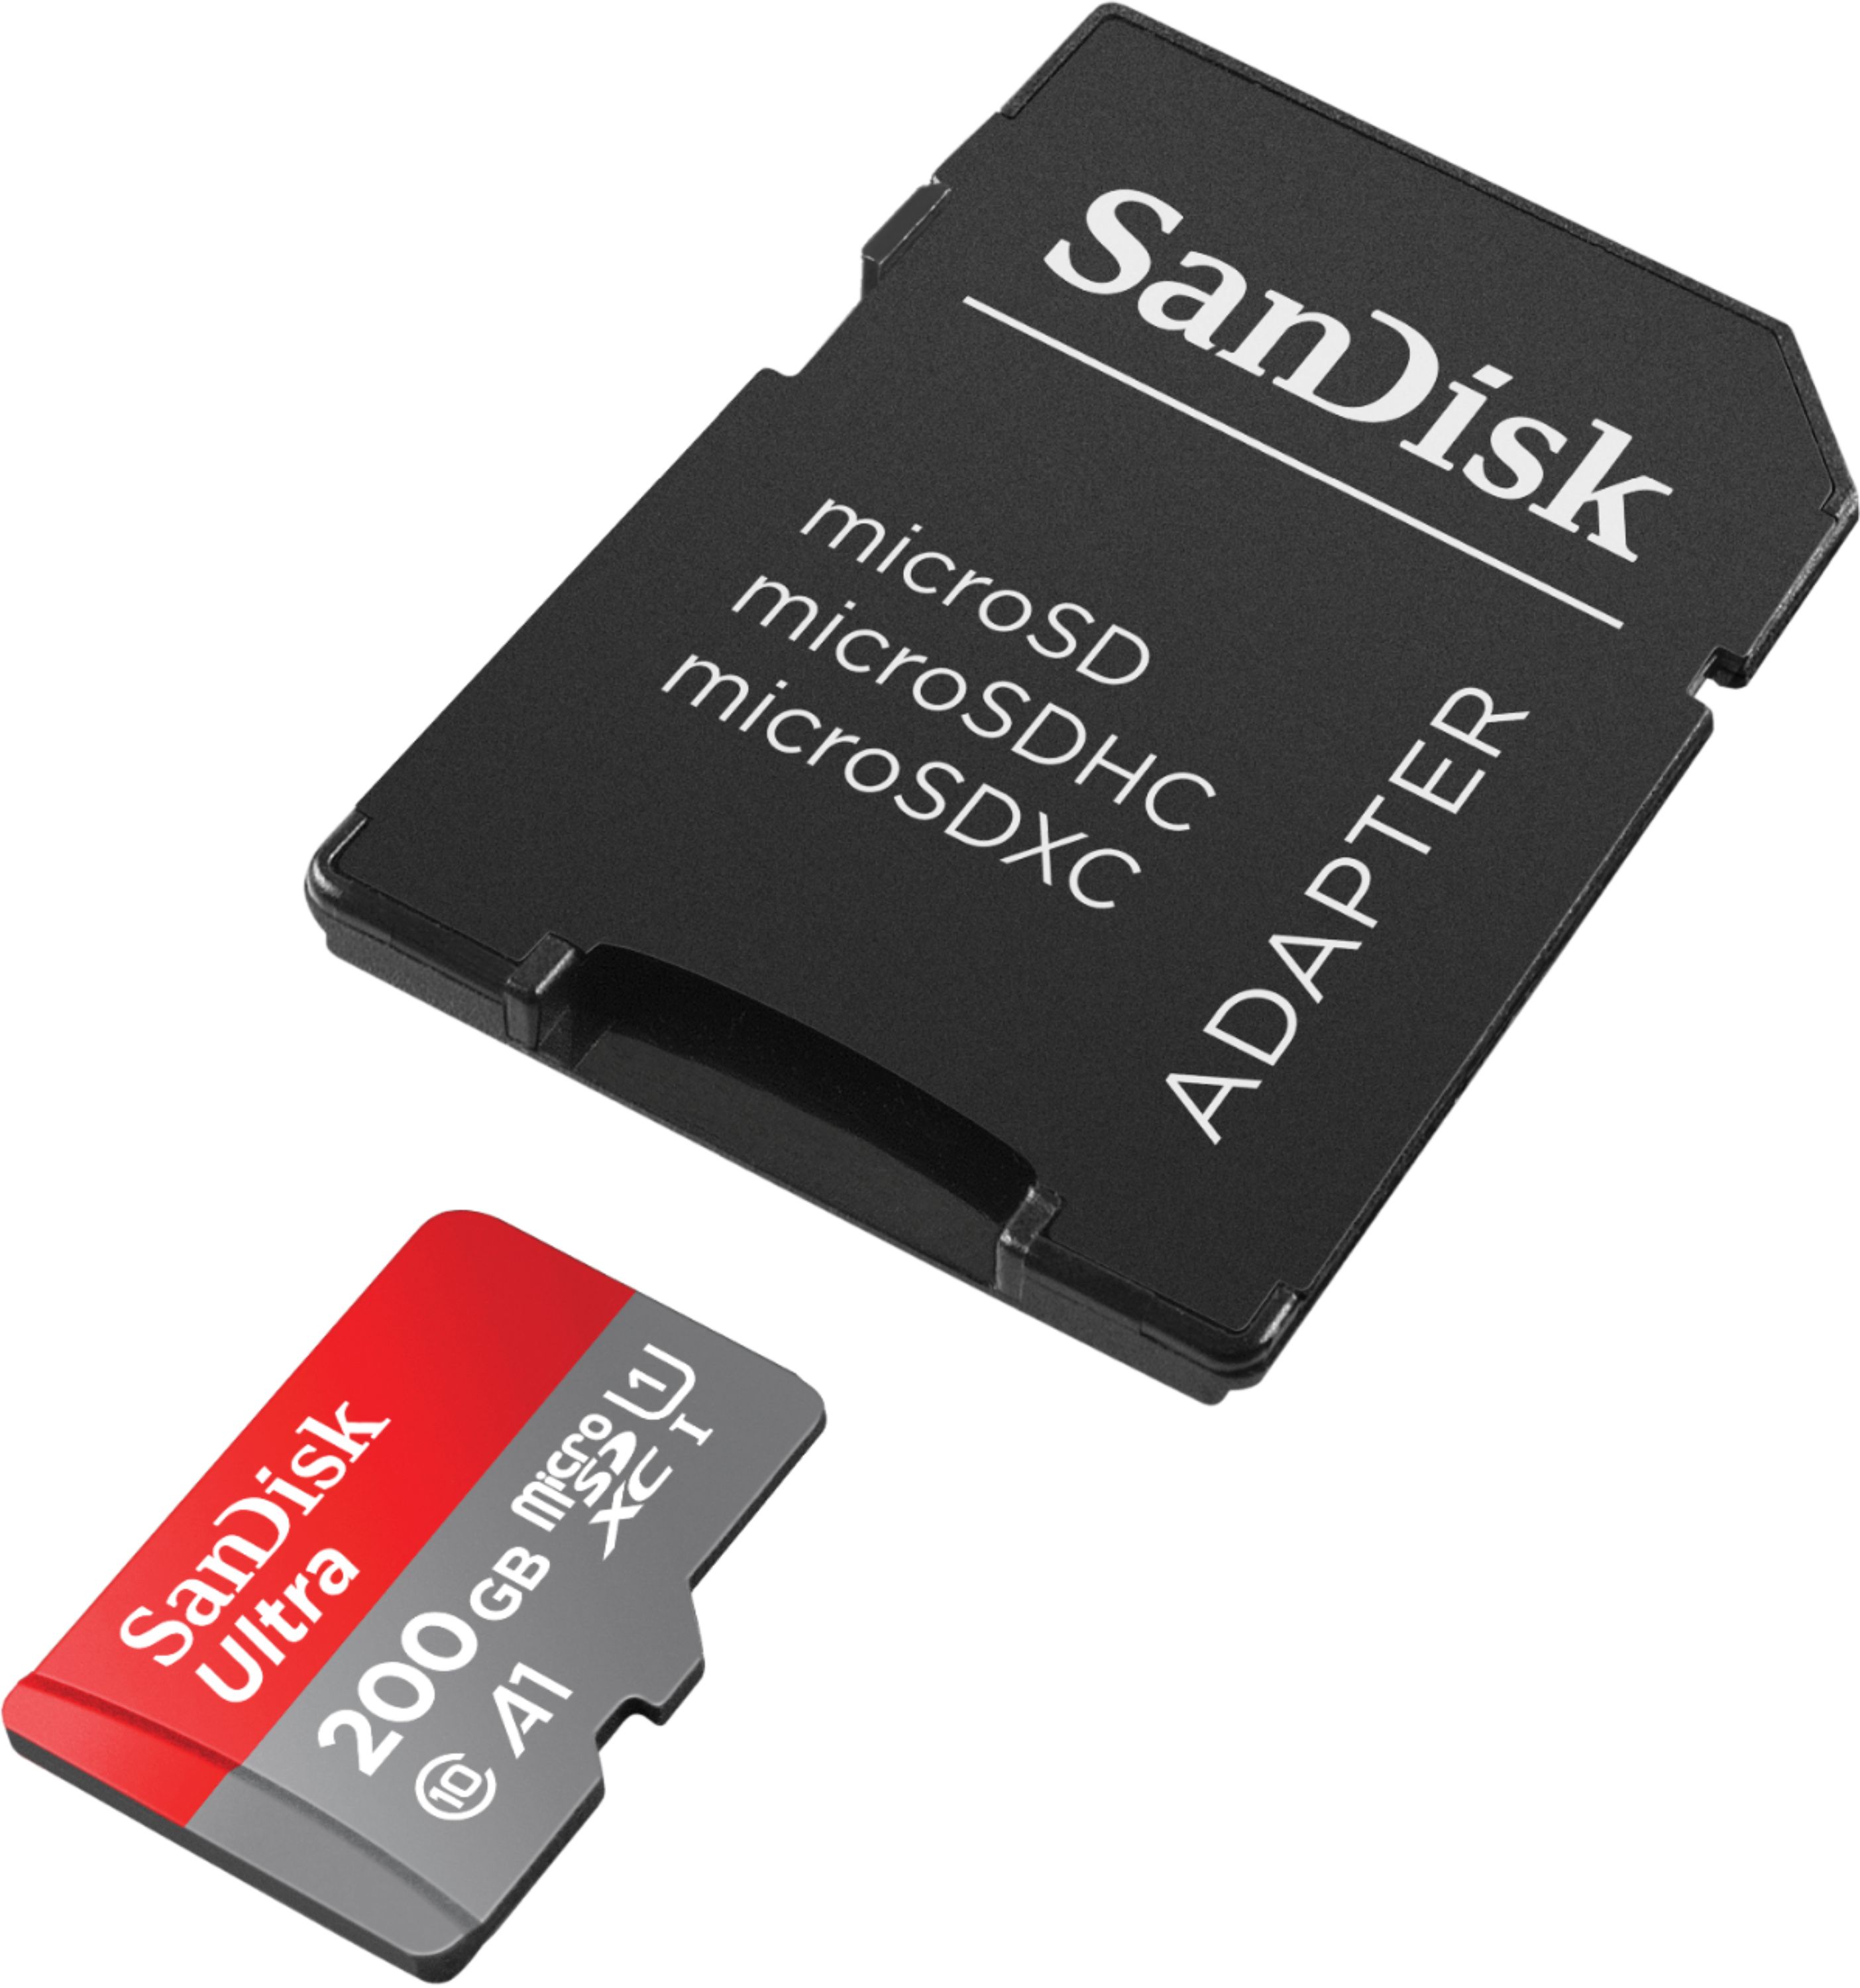 SanDisk Ultra 200GB MicroSDXC Verified for LG Q720CS by SanFlash 100MBs A1 U1 C10 Works with SanDisk 